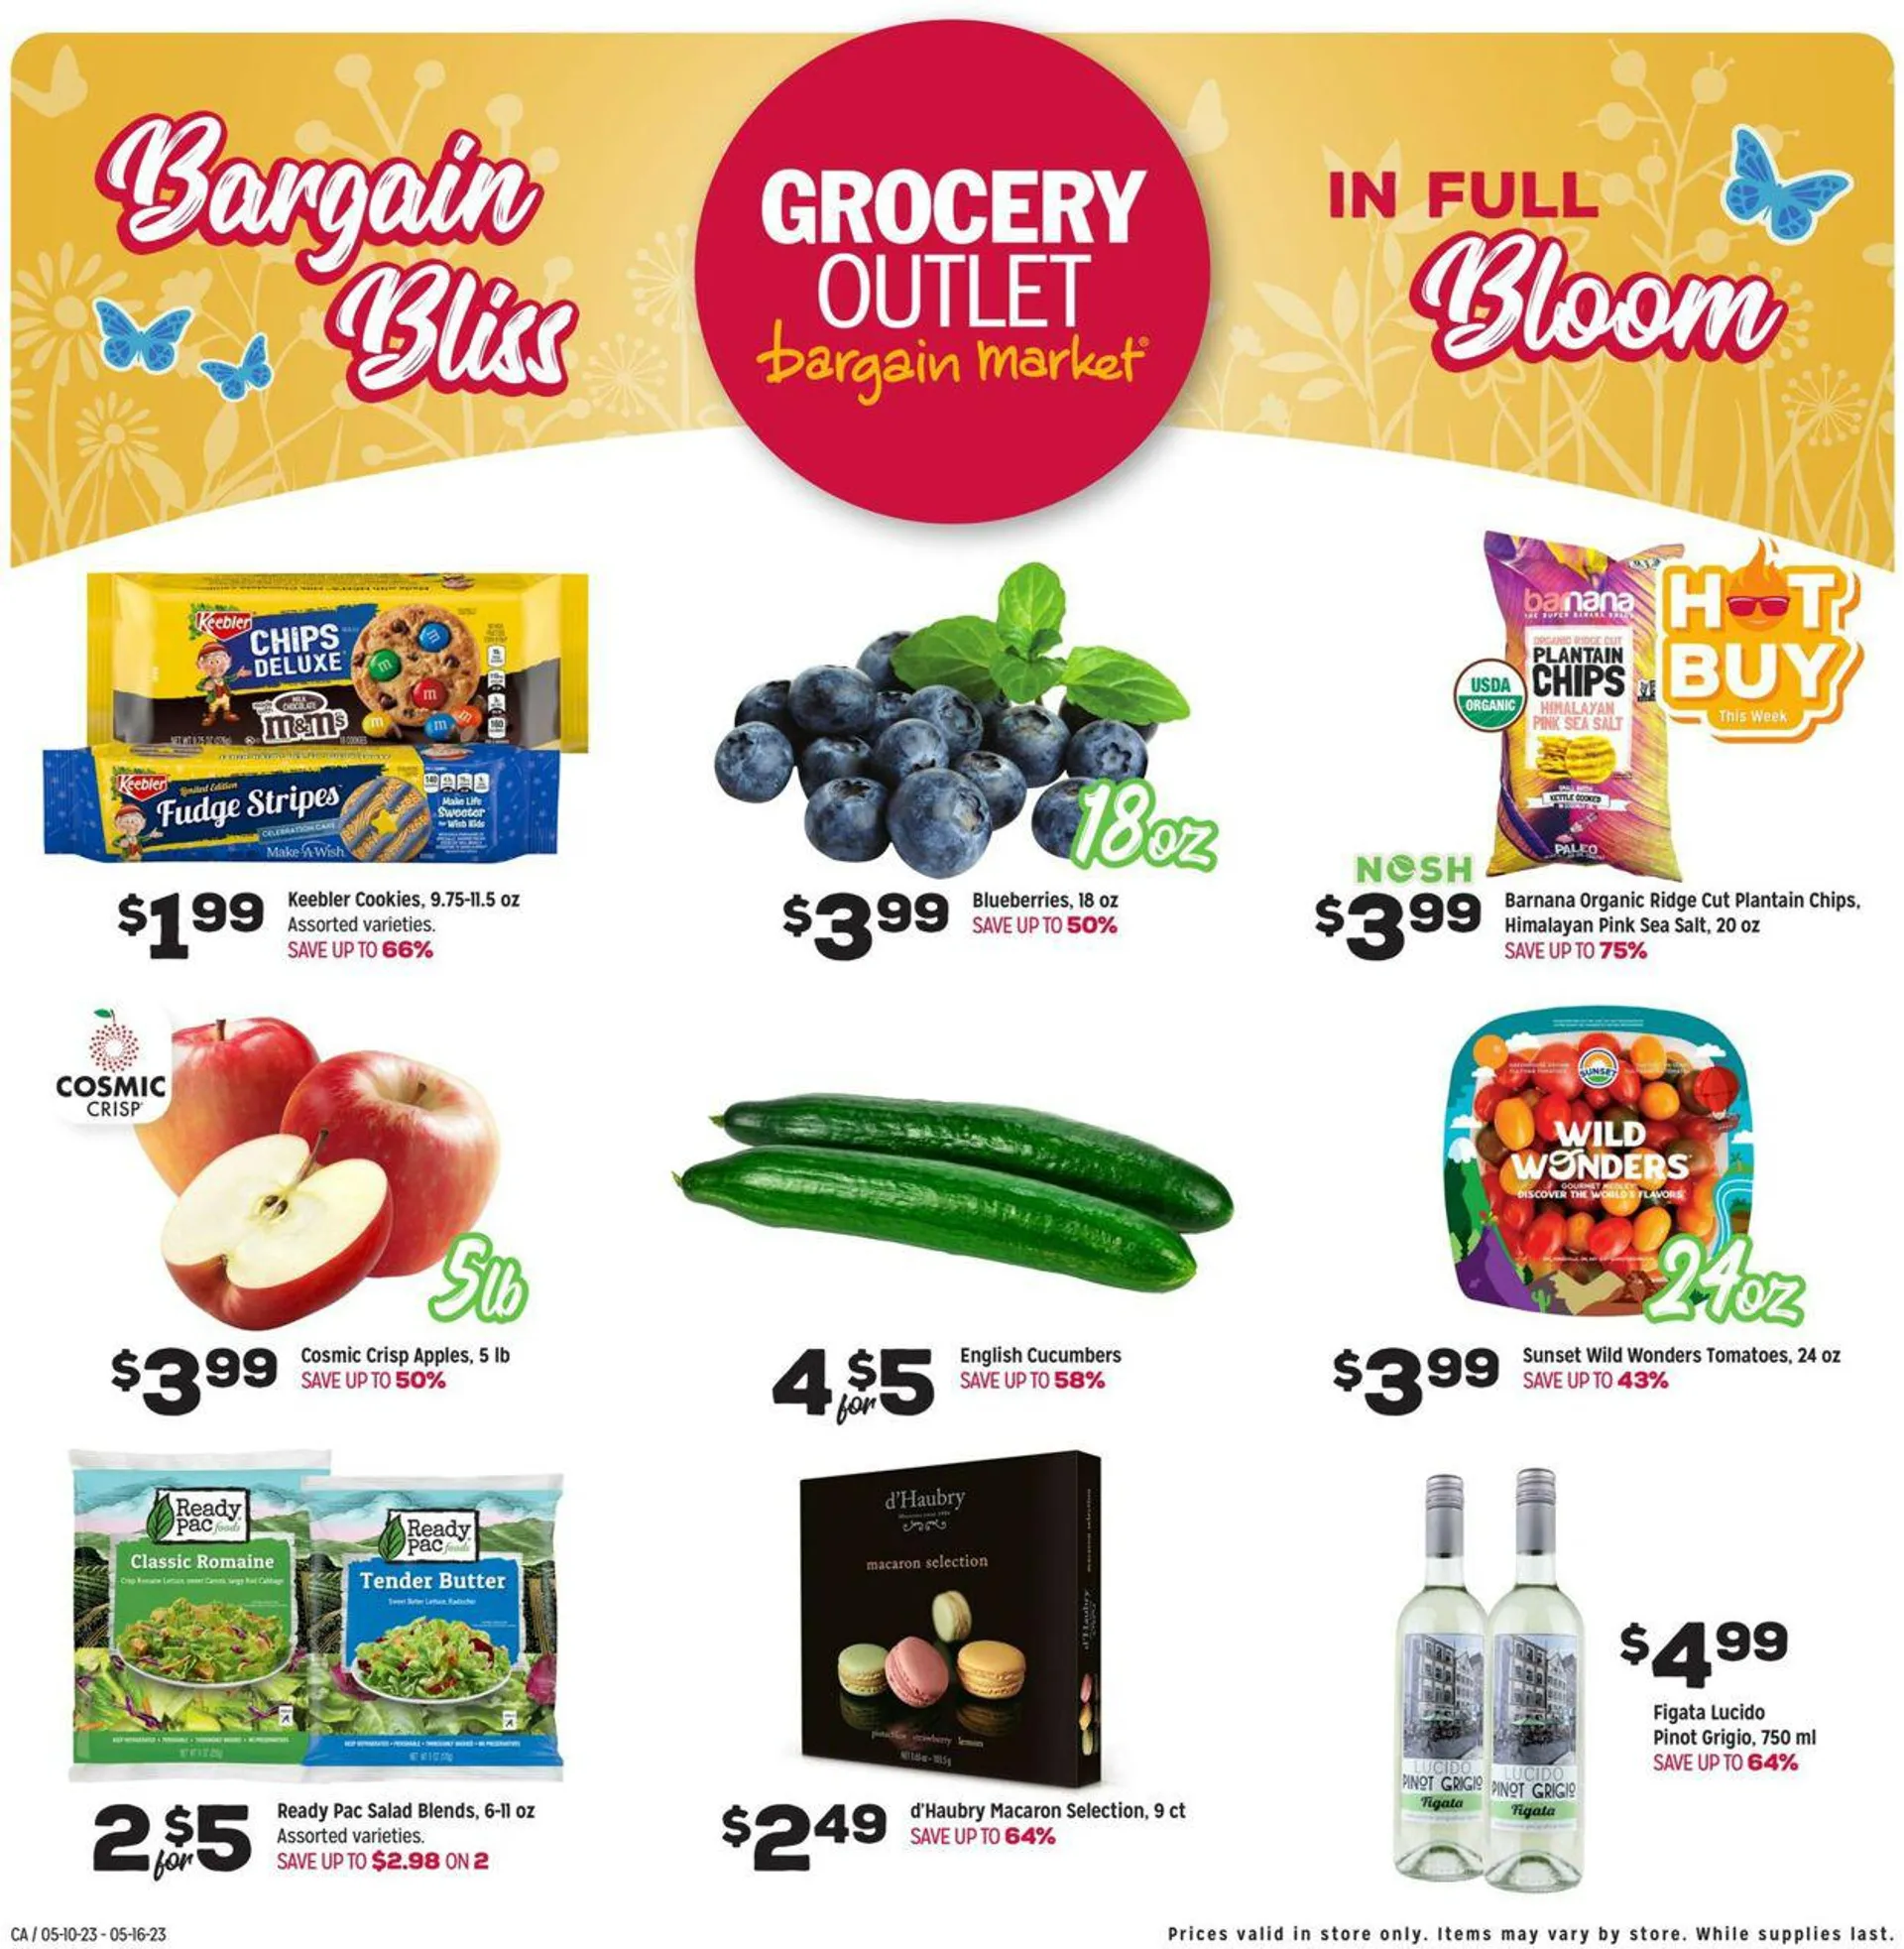 Grocery Outlet Current weekly ad - 1